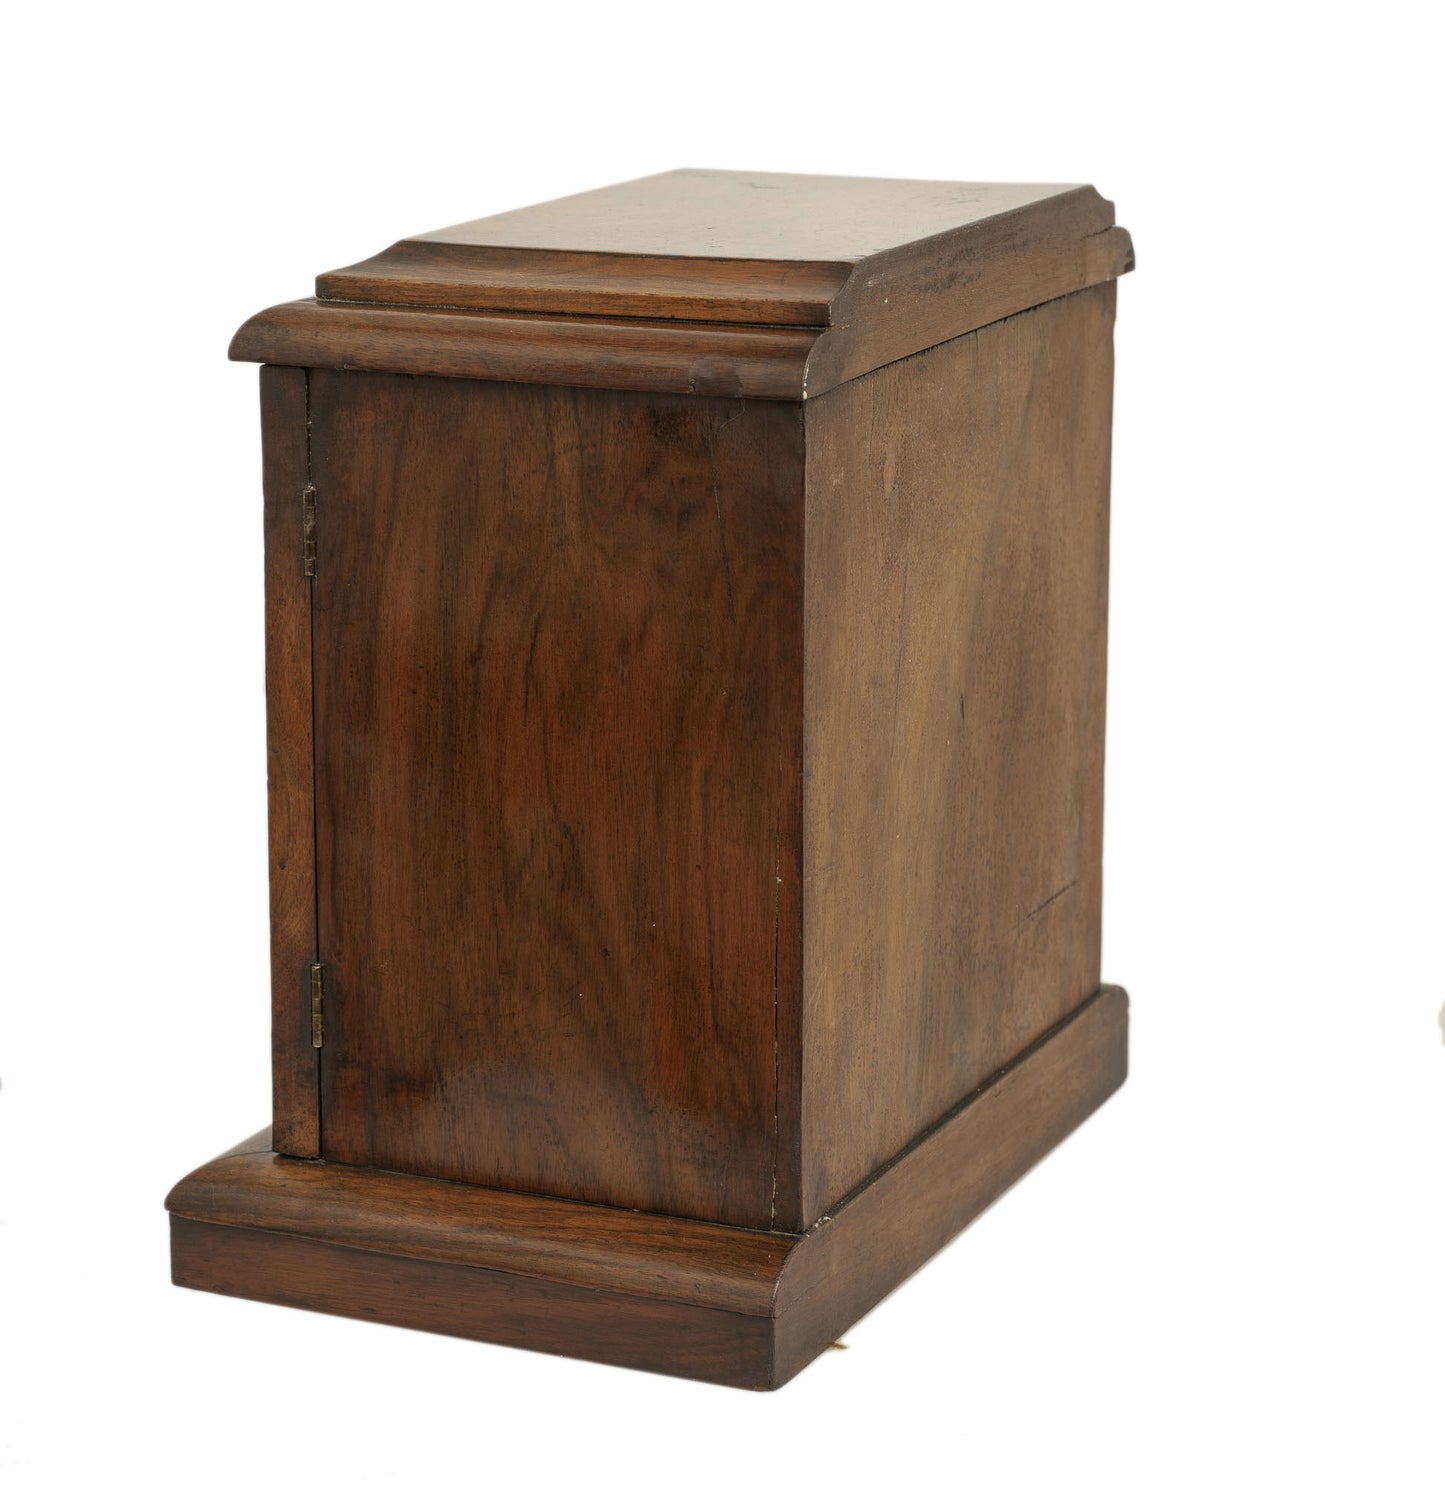 Antique Victorian Burr & Figured Walnut Table Top Miniature Cabinet with Drawers (2987)